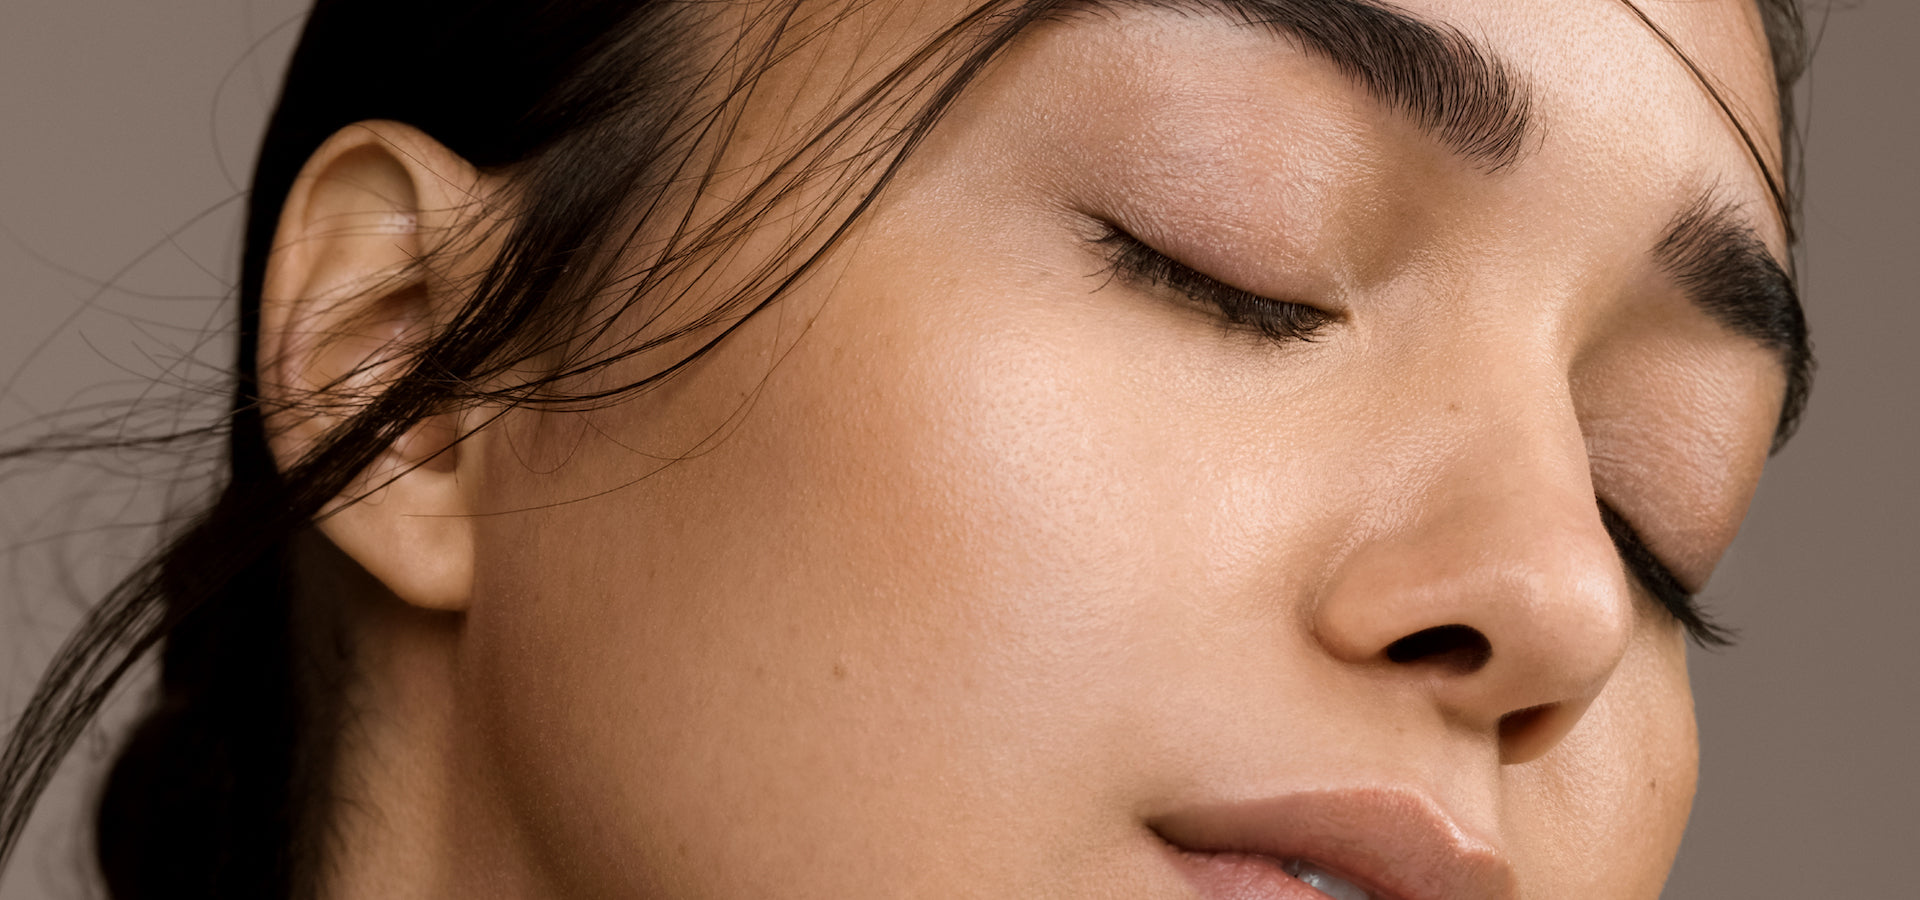 The 5 Most Common Skincare Questions, Answered